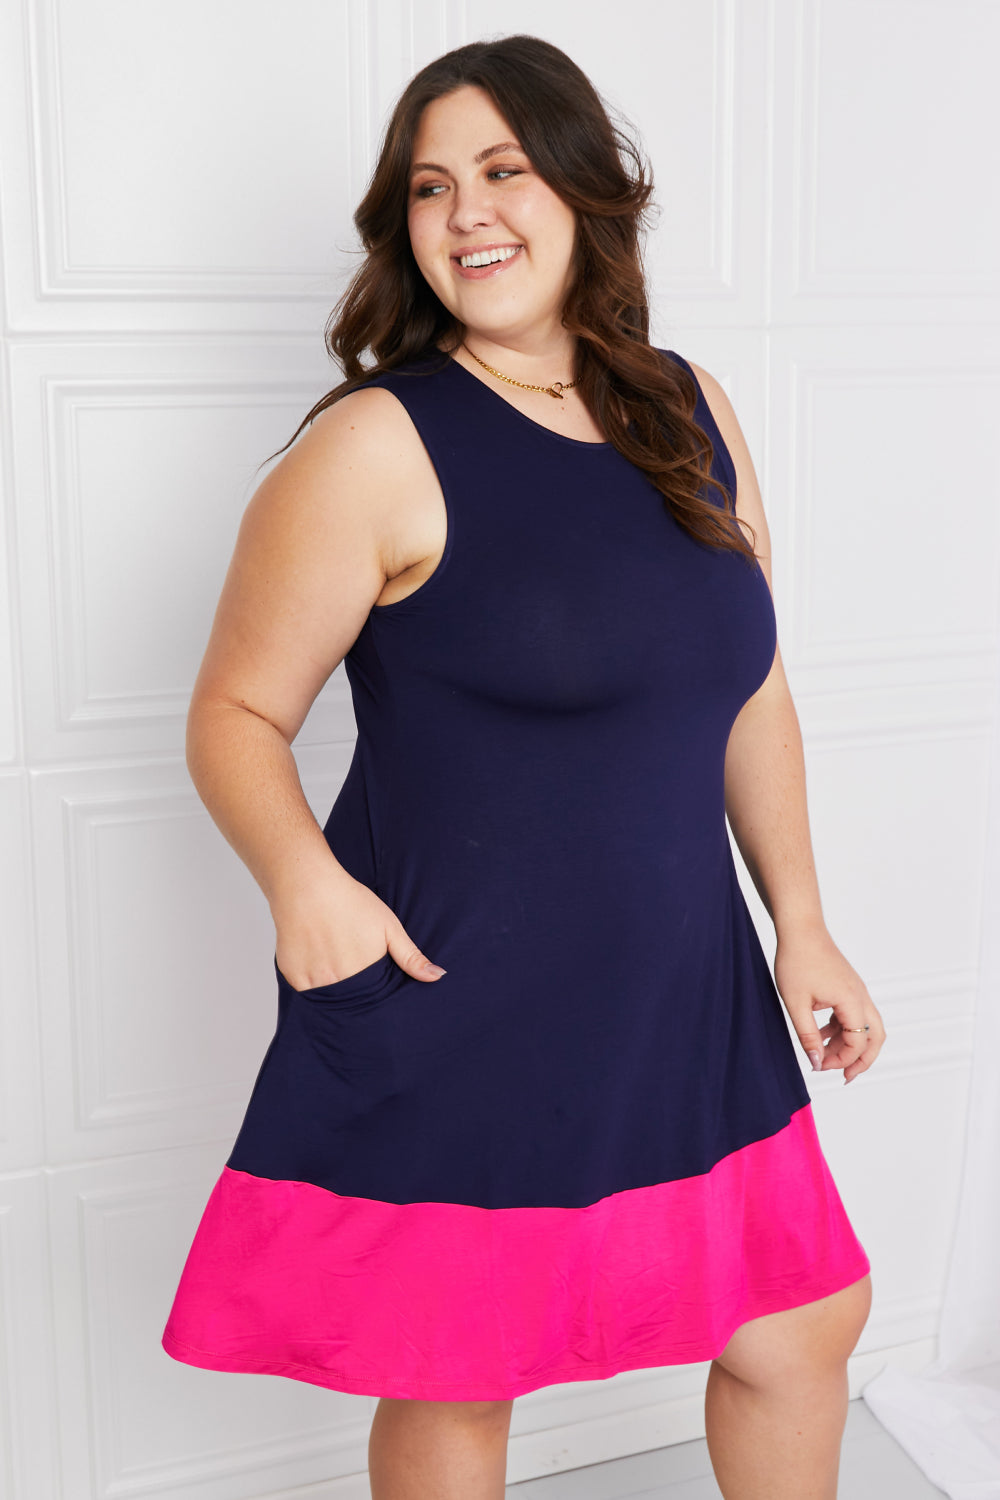 Darling Dipped Sleeveless Dress with Pockets in Navy & Fuchsia